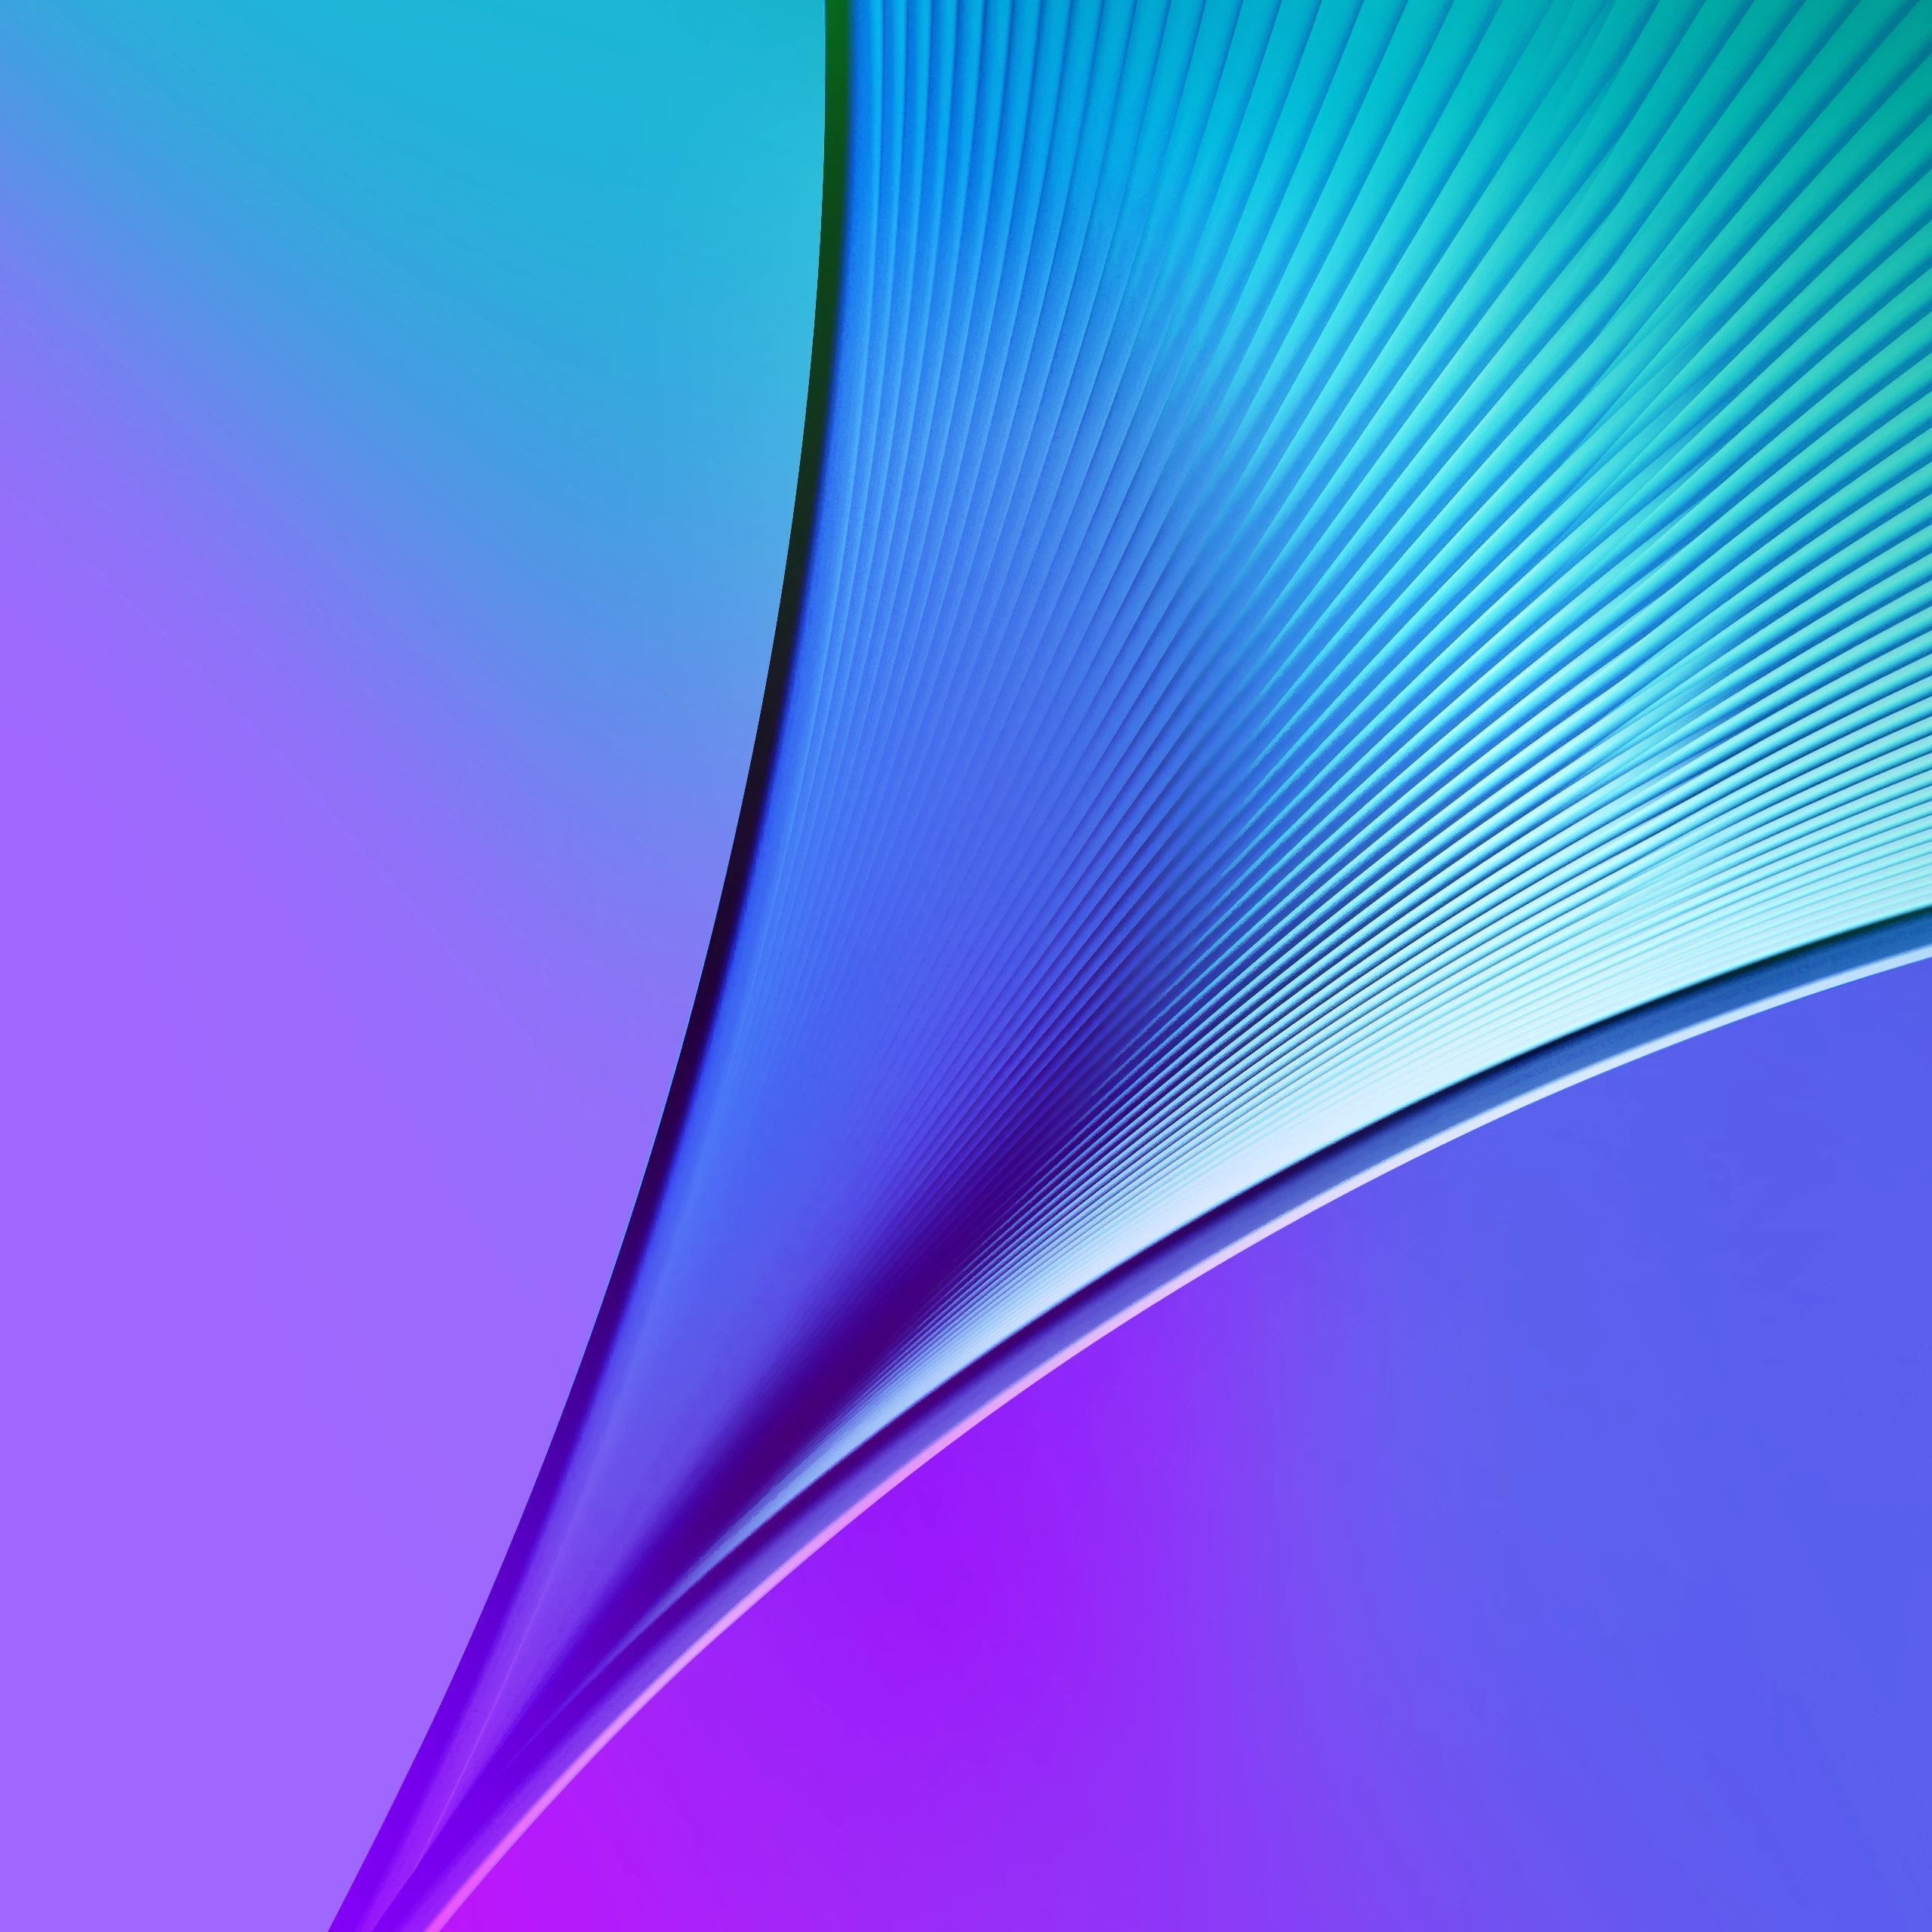 note 5 stock wallpapers | galaxy s6 edge plus stock wallpapers